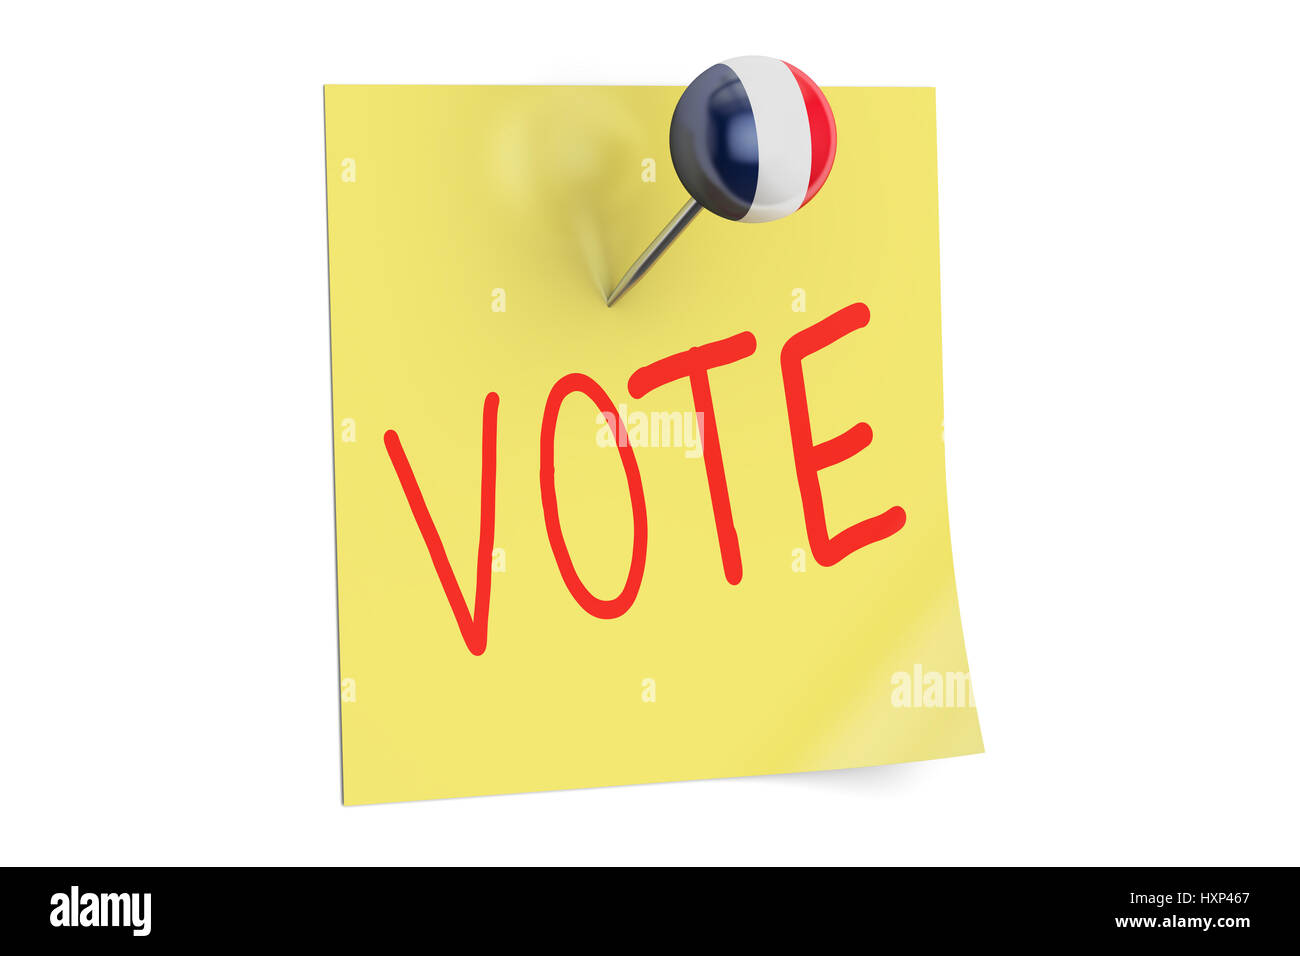 French election concept. Vote text on a sticky note pinned push pin with flag of France. 3D rendering Stock Photo